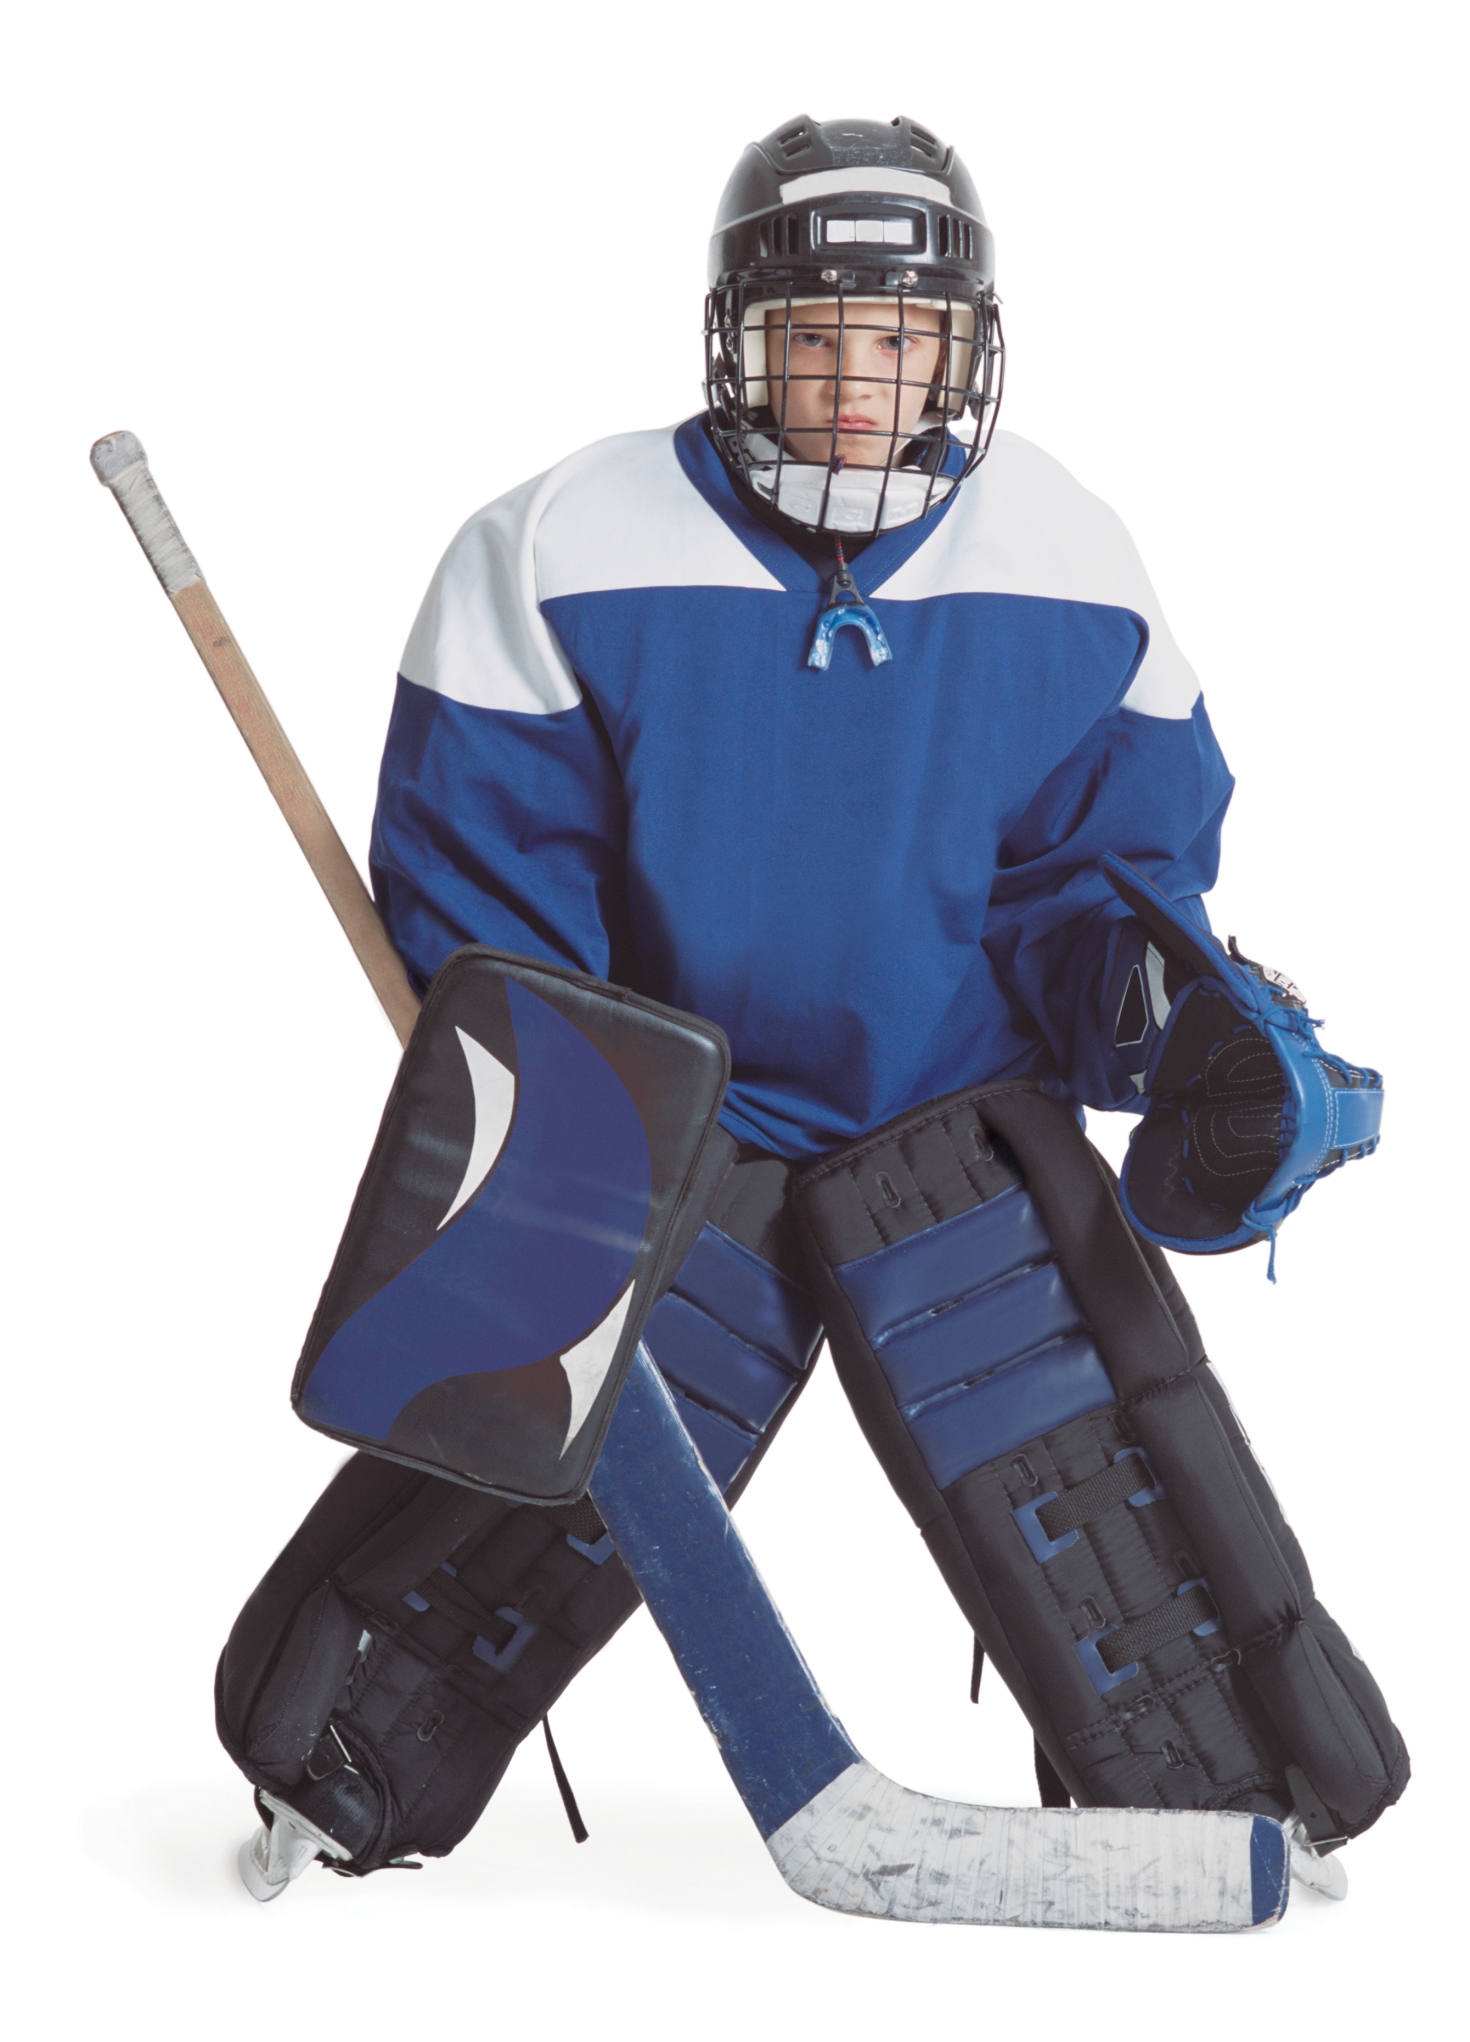 Hockey gear for beginners: What you need and how to suit up for the ice